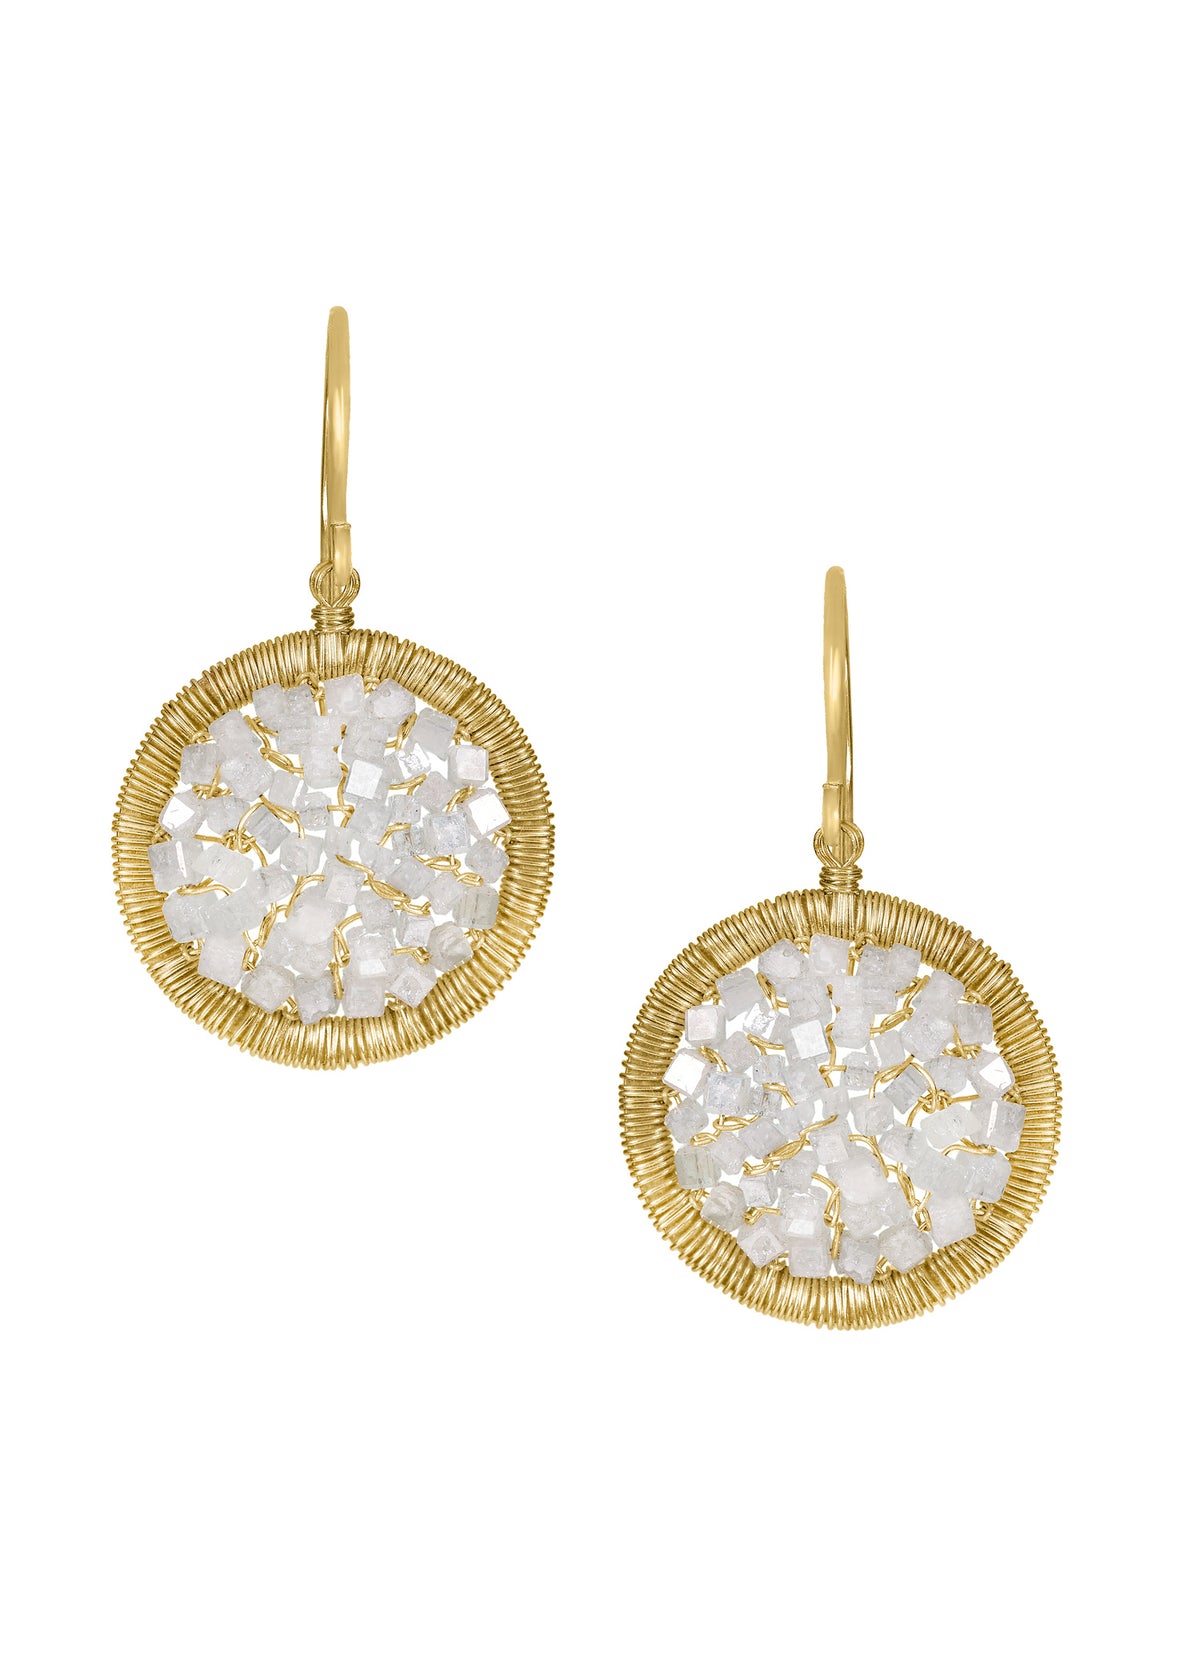 Diamond 14k gold Earrings measure 1-1/8&quot; in length (including the ear wires) and 9/16&quot; in width Handmade in our Los Angeles studio